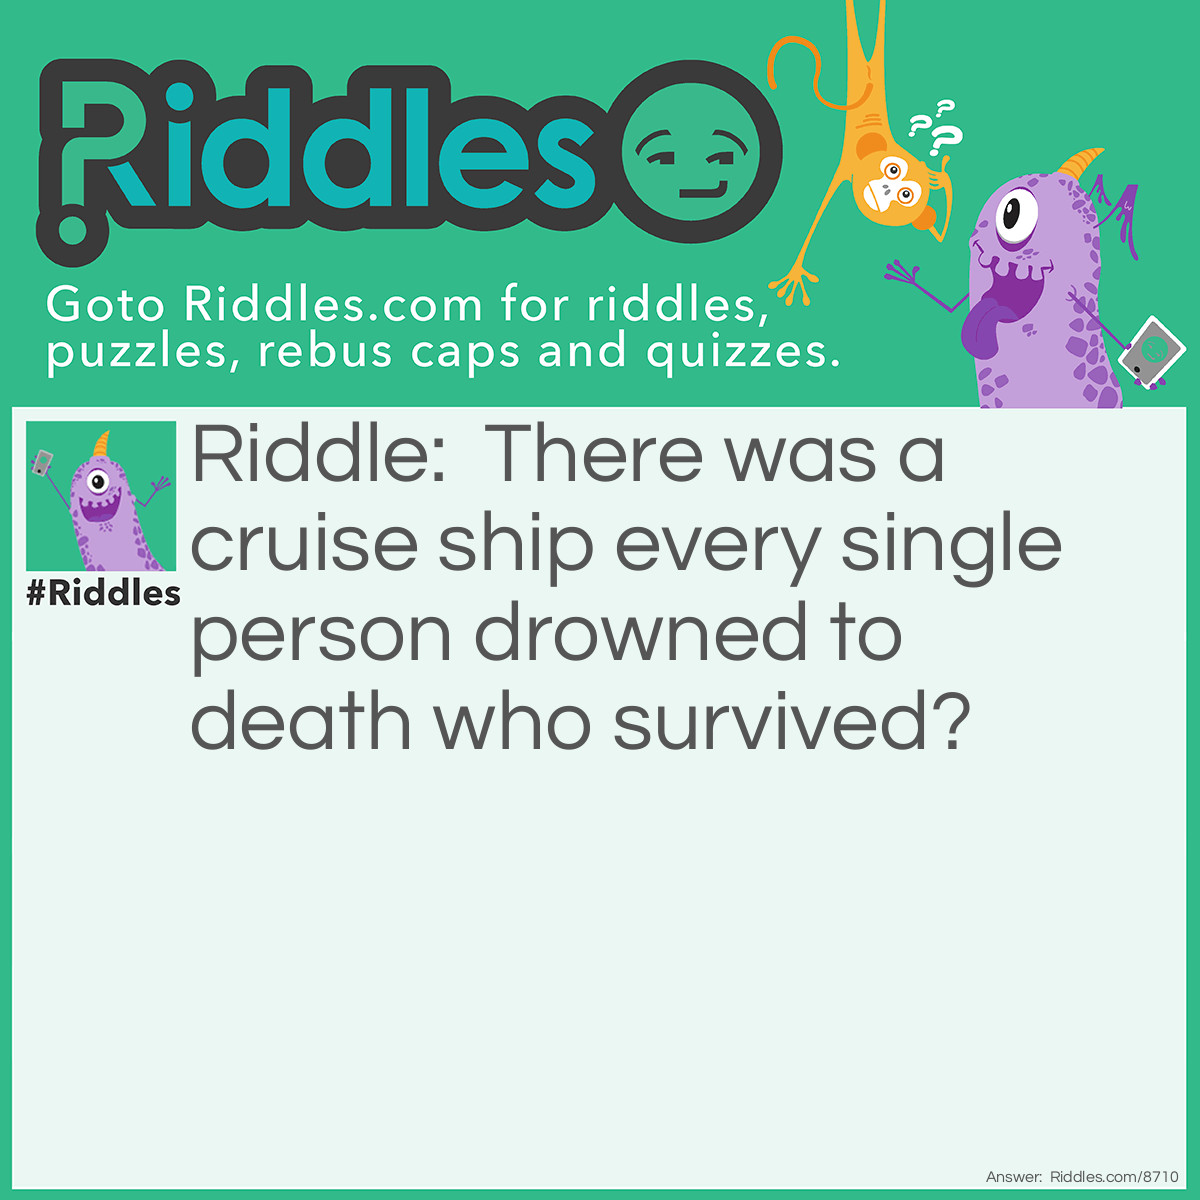 Riddle: There was a cruise ship every single person drowned to death who survived? Answer: Every body married survived